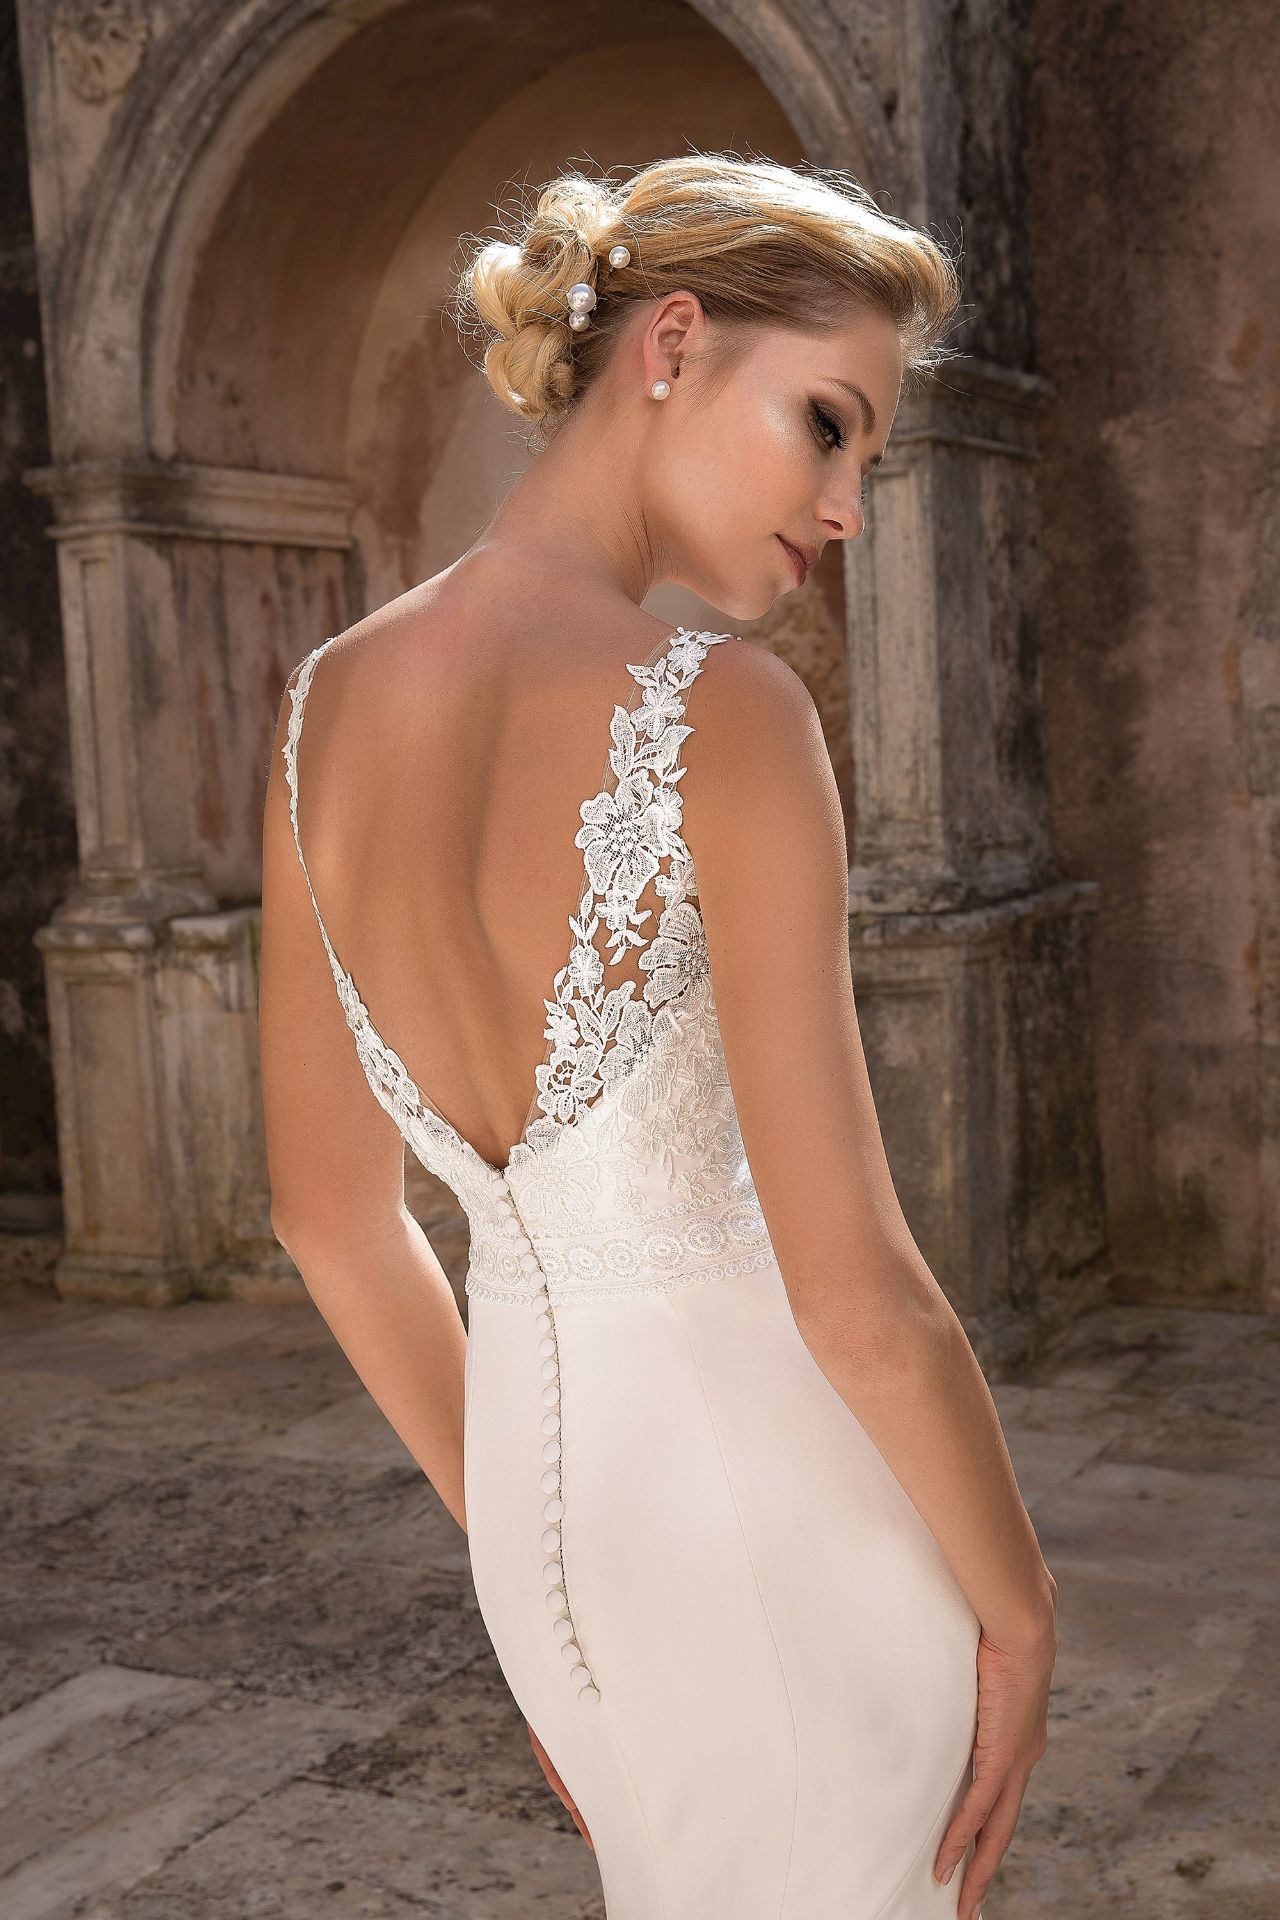 1 x Justin Alexander 'Venice' Lace And Crepe Fit and Flare Wedding Dress - UK Size 12 - RRP £1,390 - Image 4 of 7